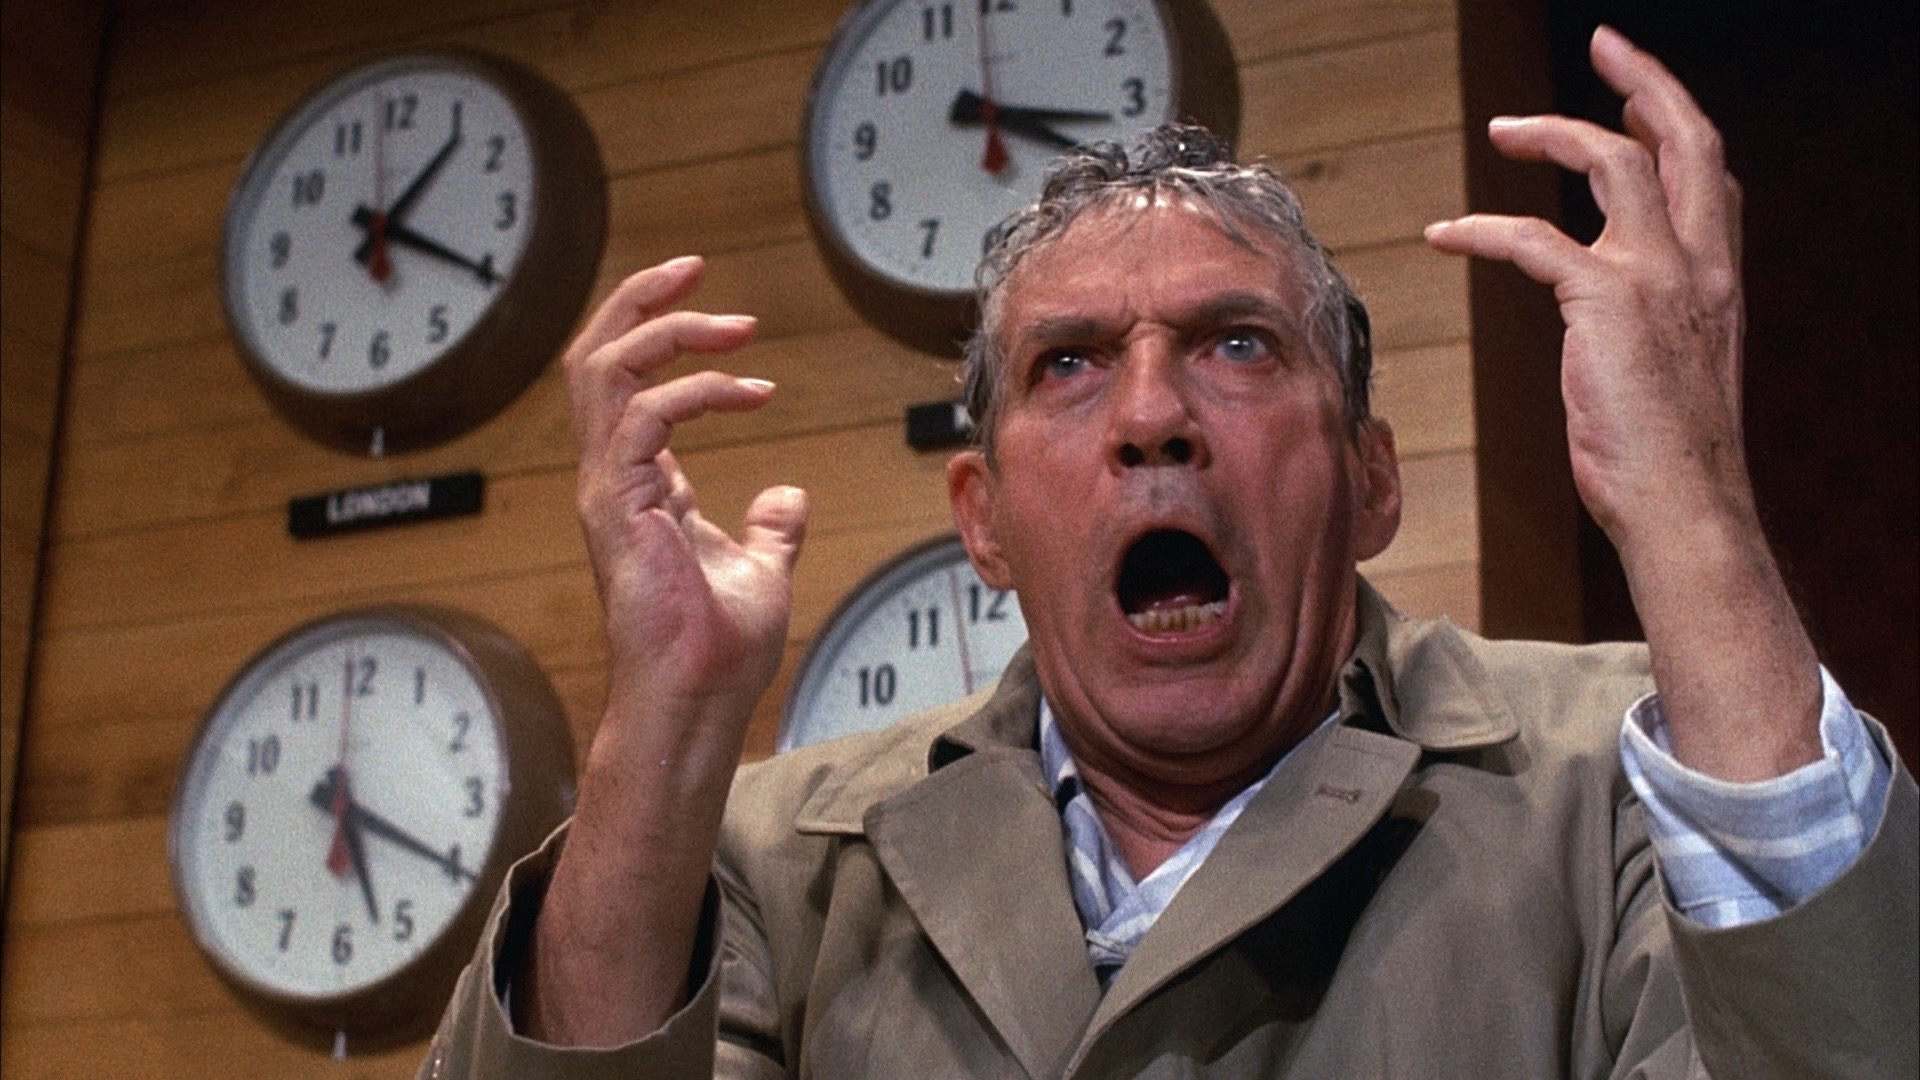 Howard Beale from the film Network, angry in front of clocks.